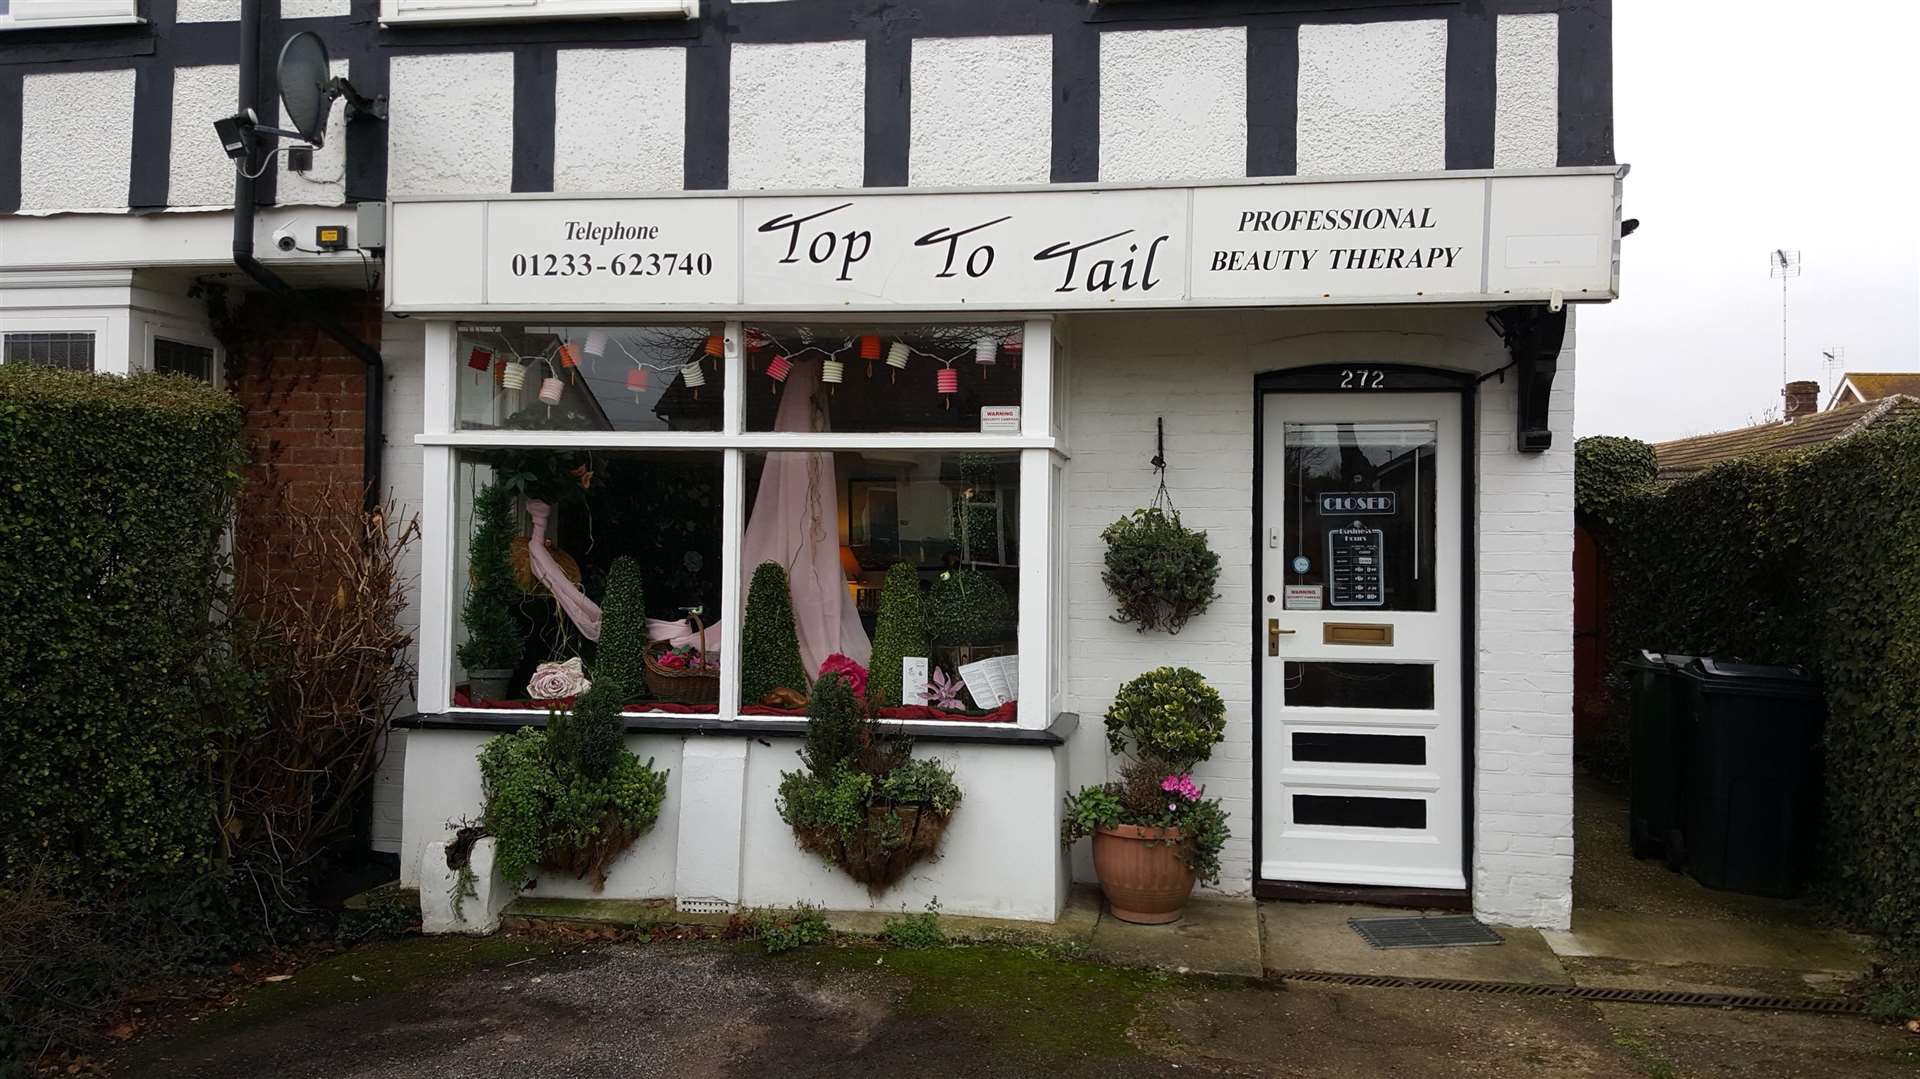 Top to Tail in Faversham Road